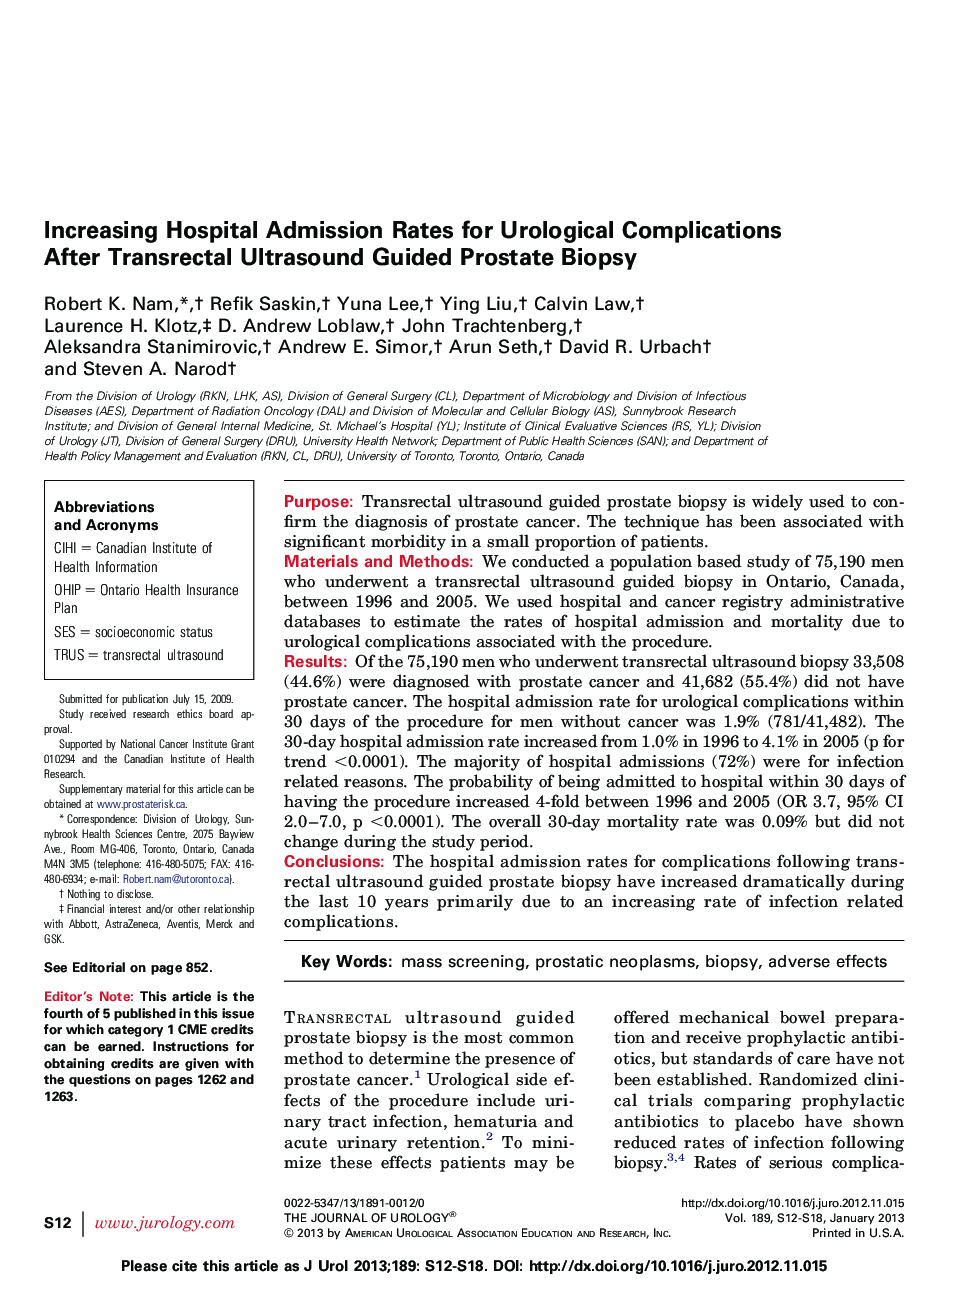 Increasing Hospital Admission Rates for Urological Complications After Transrectal Ultrasound Guided Prostate Biopsy 